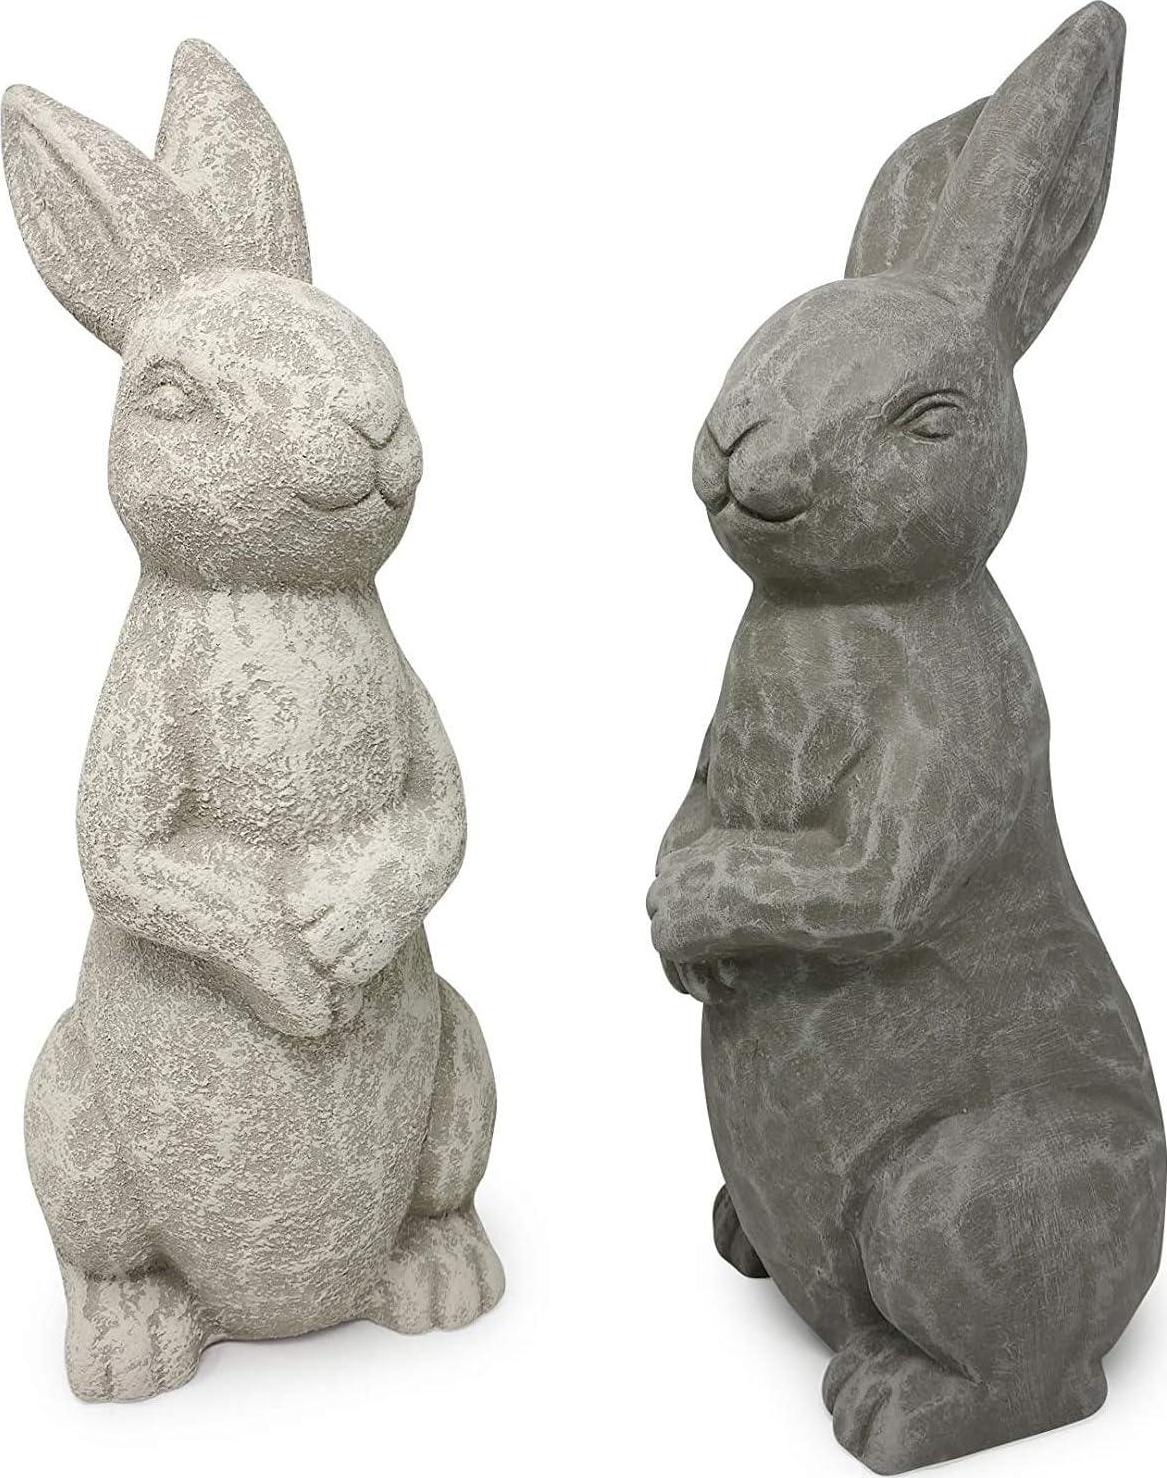 14 Inch Tall Standing Sculpture for Your Patio and Yard, Outdoor Lawn décor, Cute Ceramic Figurine Garden Rabbit Bunny Statue, Gray Cement